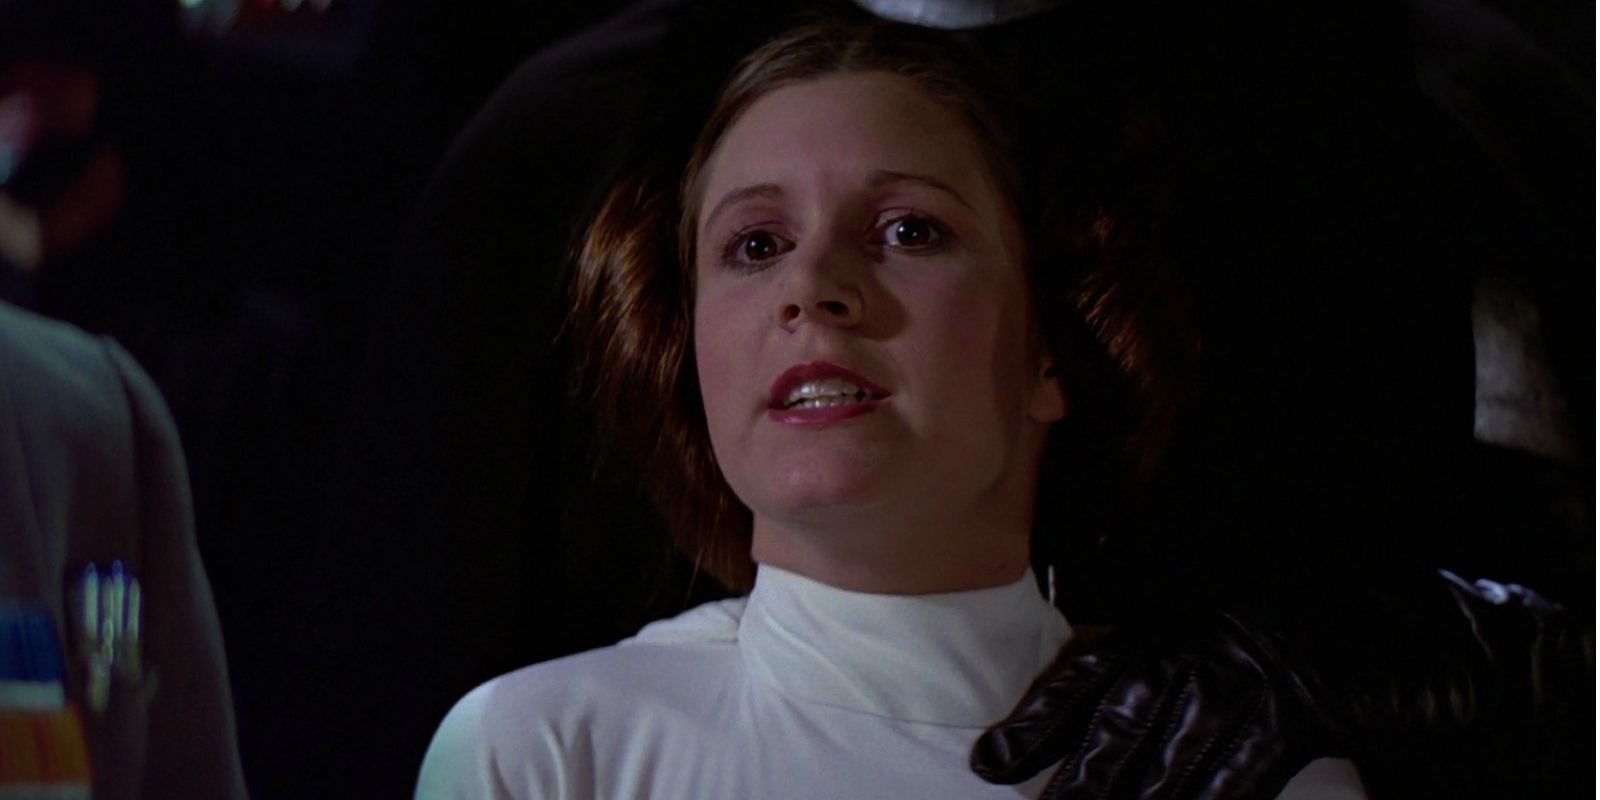 Leia is forced to watch the Empire destroy Alderaan in Star Wars